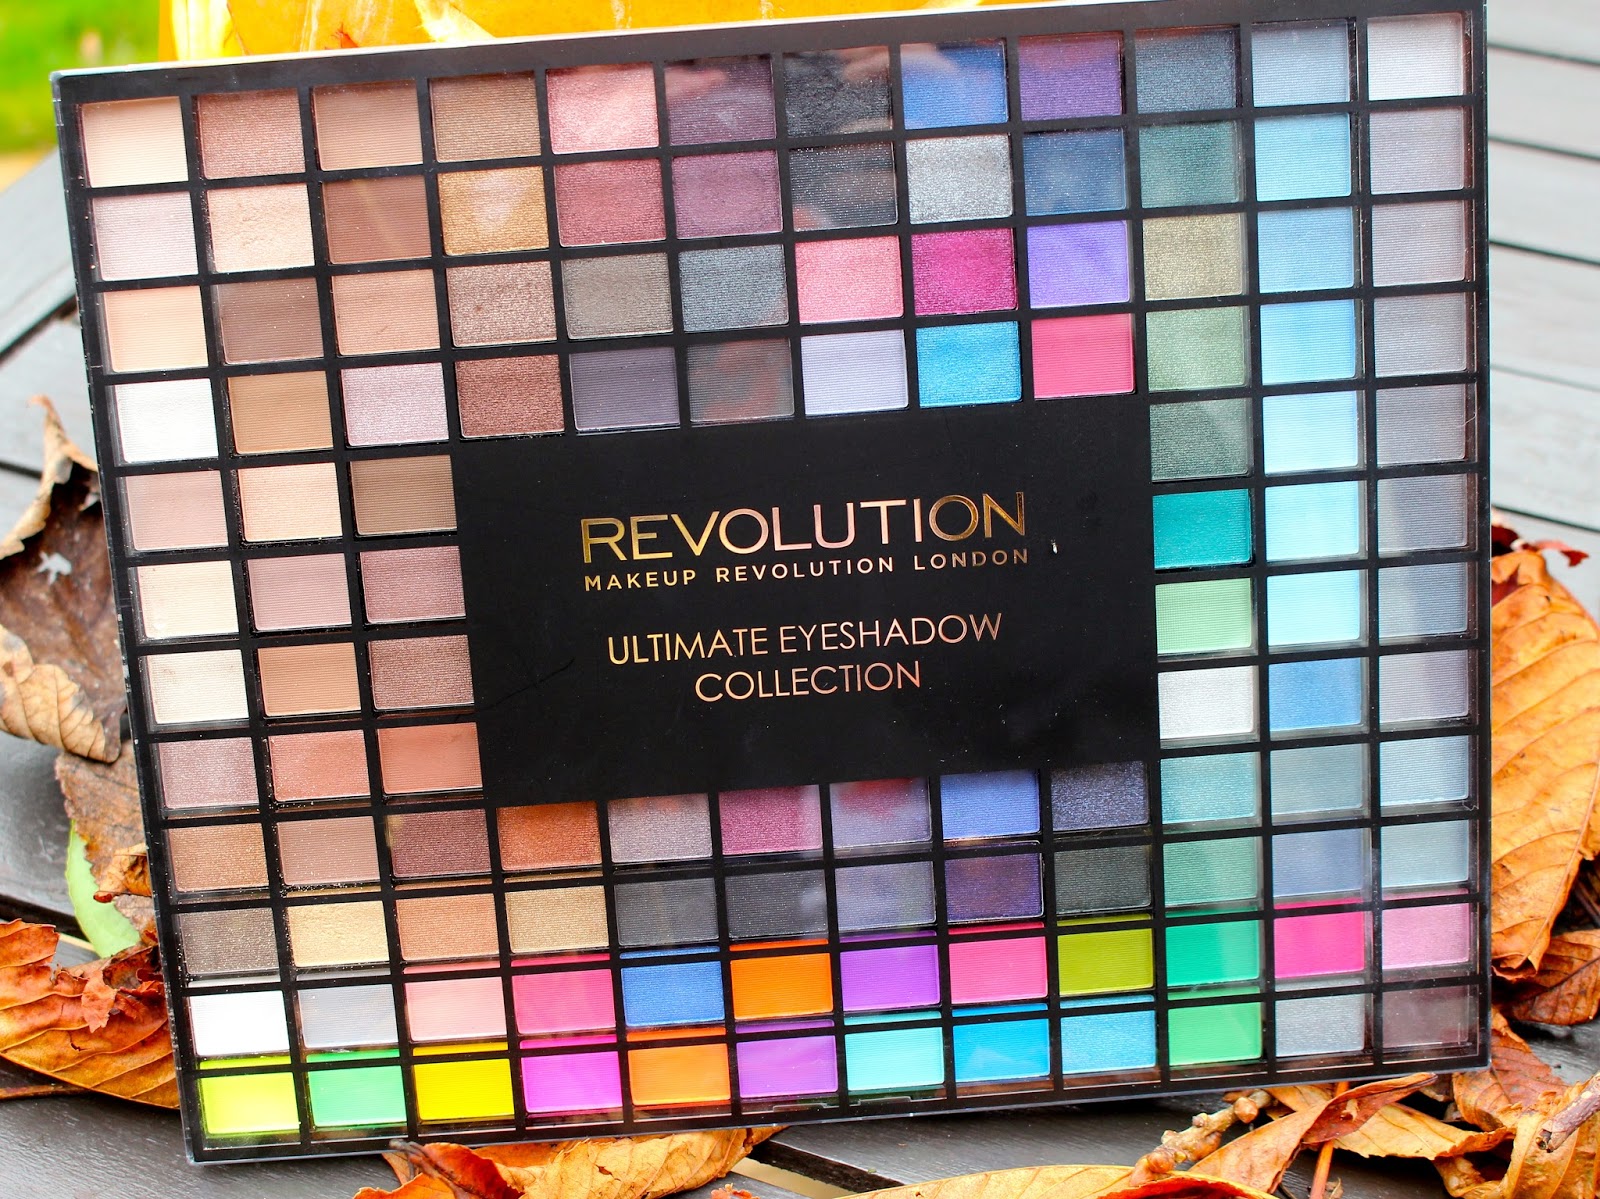 Makeup revolution 144 eyeshadow palette review